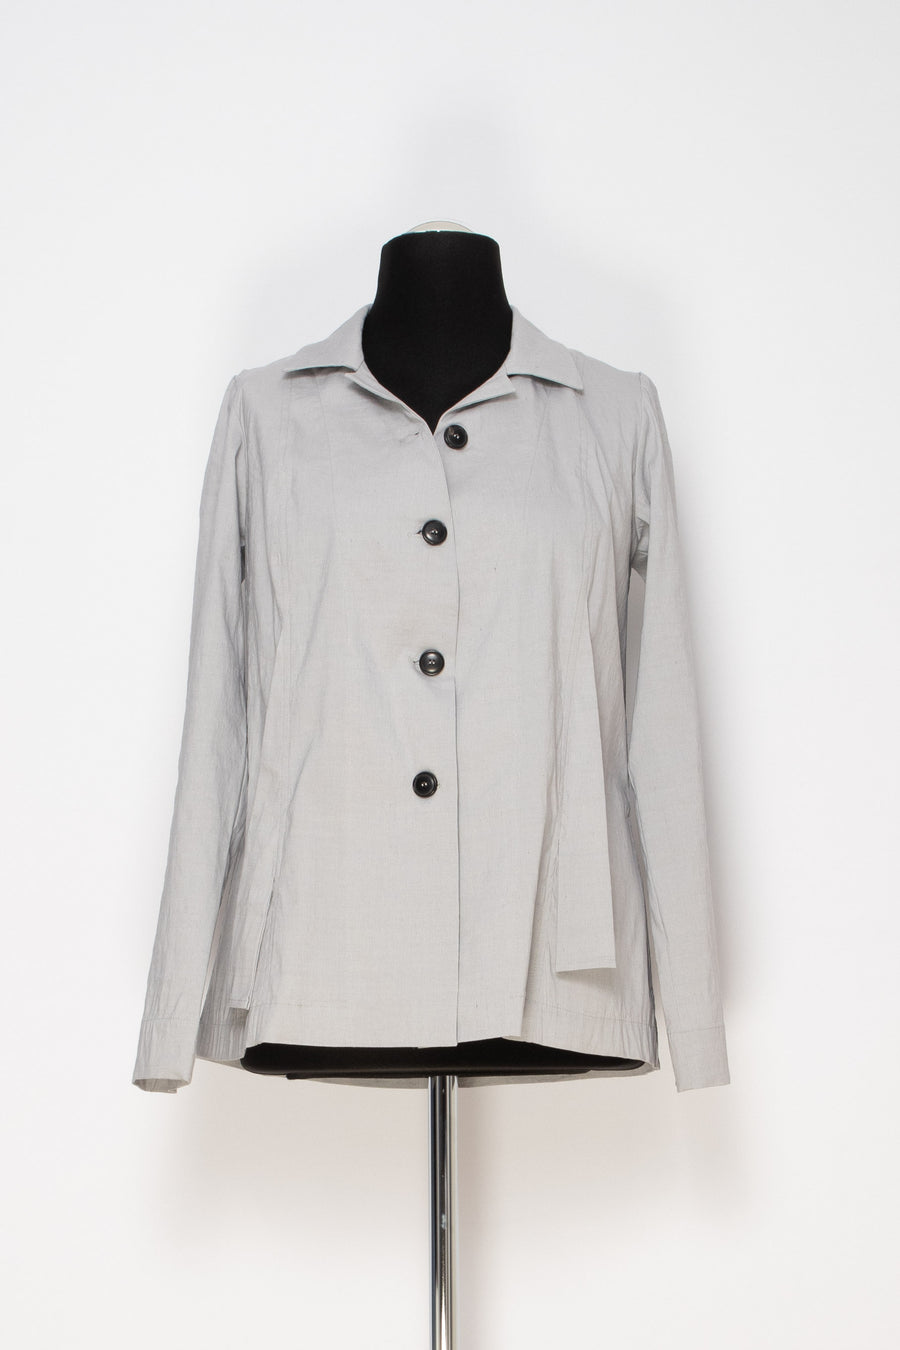 Jacket in linen/viscose mix with spandex (Item no. 222j2)